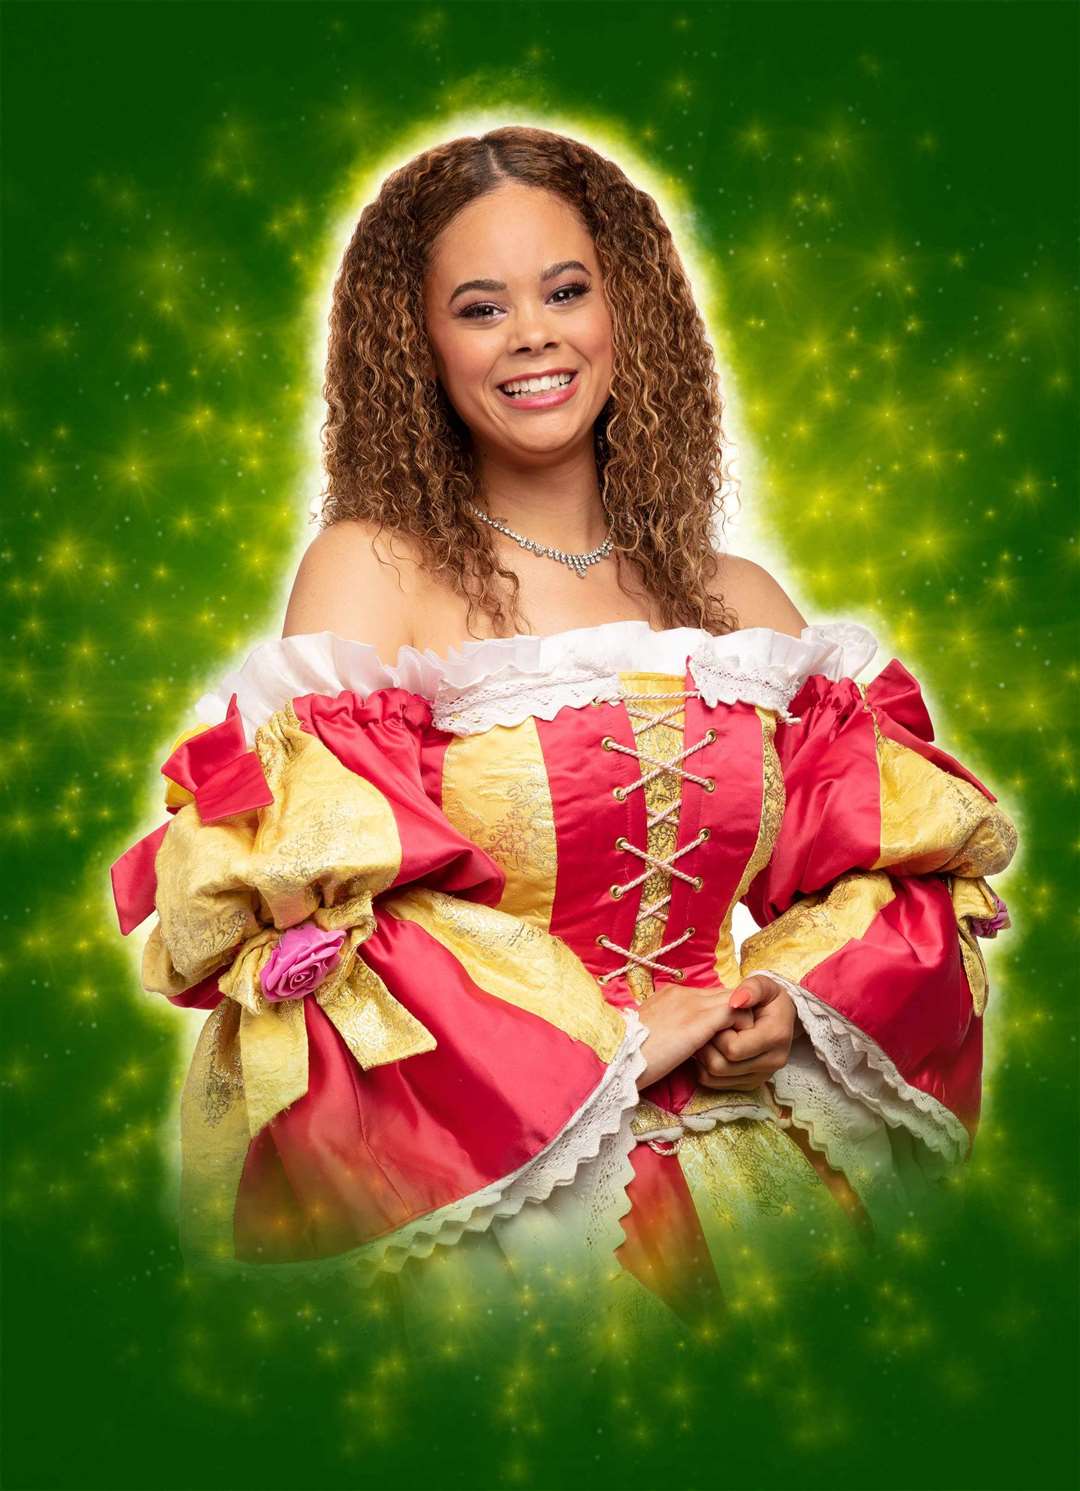 Children's TV presenter Kiera-Nicola Brennan – from Milkshake on Channel 5 – will play the Princess Apricot when the panto returns to the Orchard Theatre. Picture: Orchard Theatre